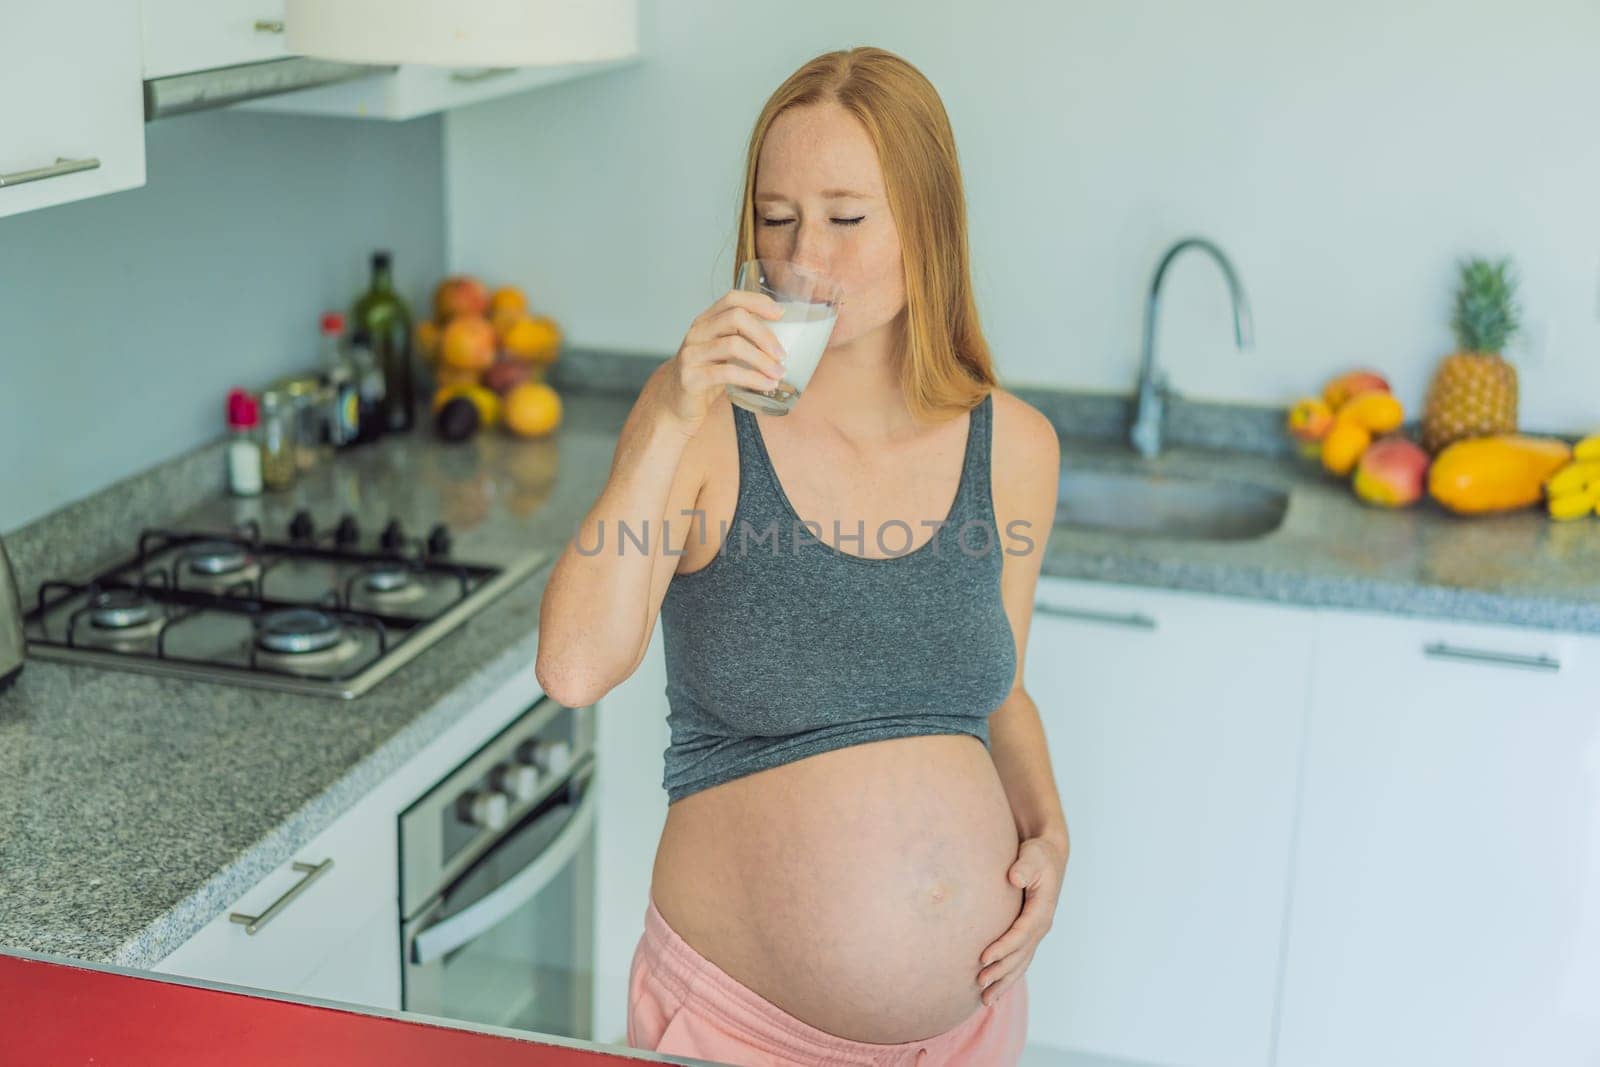 Weighing the pros and cons of milk during pregnancy, a thoughtful pregnant woman stands in the kitchen with a glass, contemplating the decision to include or avoid milk for her and her baby's well-being by galitskaya